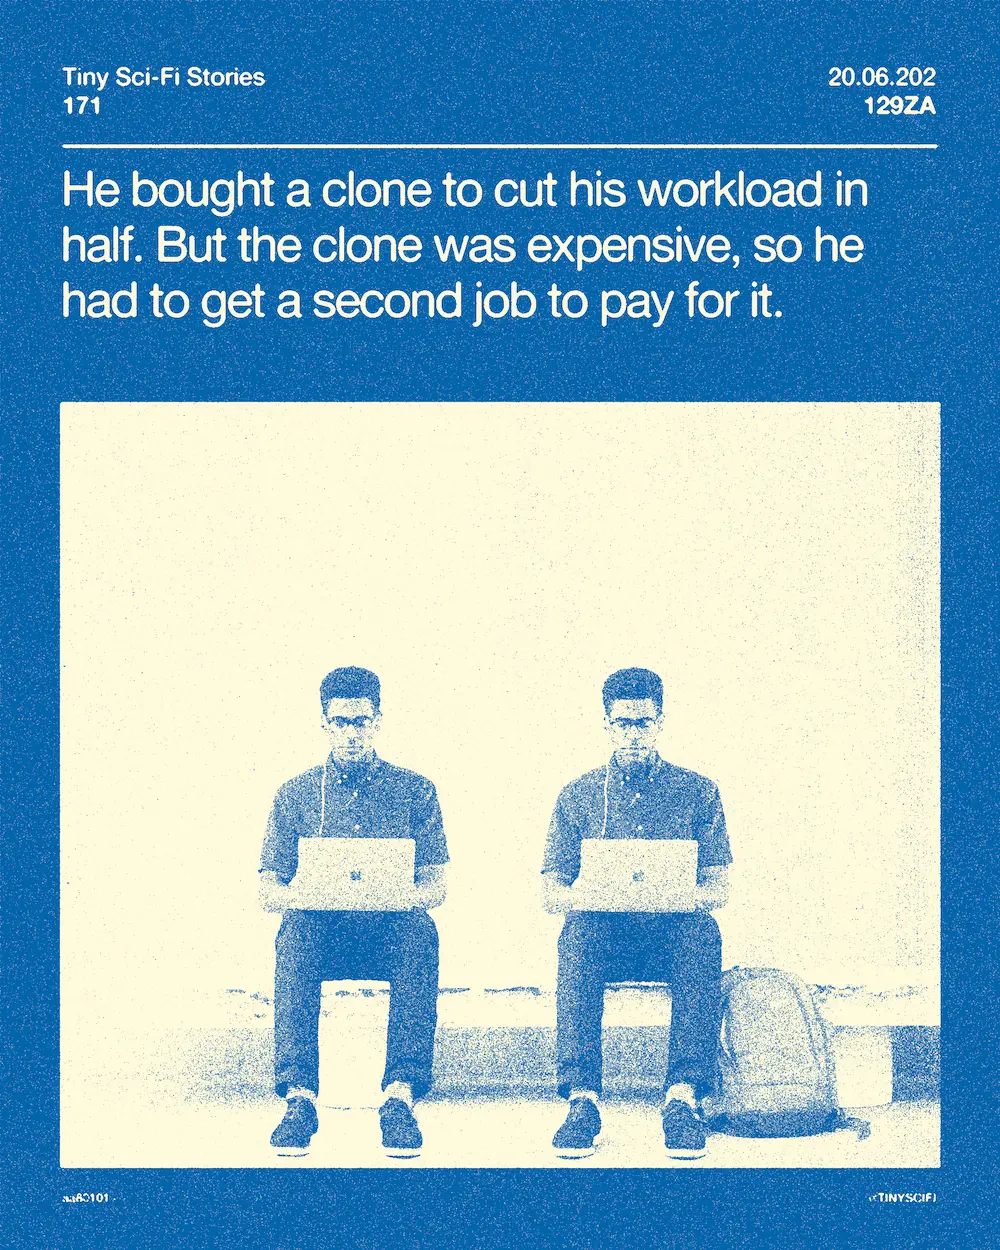 He bought a clone to cut his workload in half. But the clone was expensive, so he had to get a second job to pay for it.